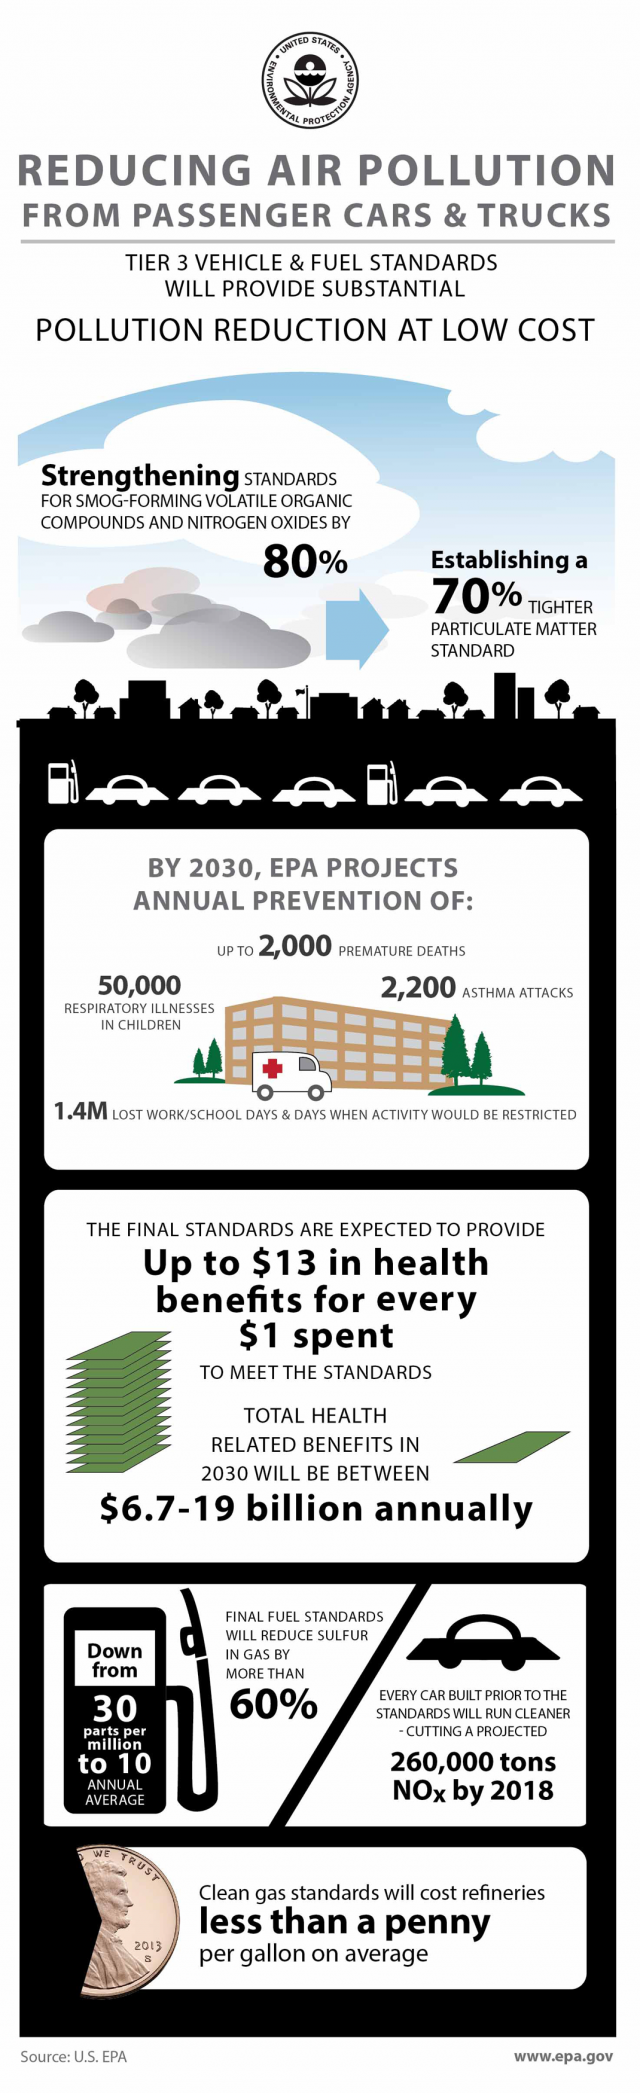 Infographic showing that Tier 3 vehicle and fuel standards will provide substantial pollution reduction at low cost, annual prevention projections for 2030, health benefits for final standards, and sulfur and nitrogen dioxide reductions.